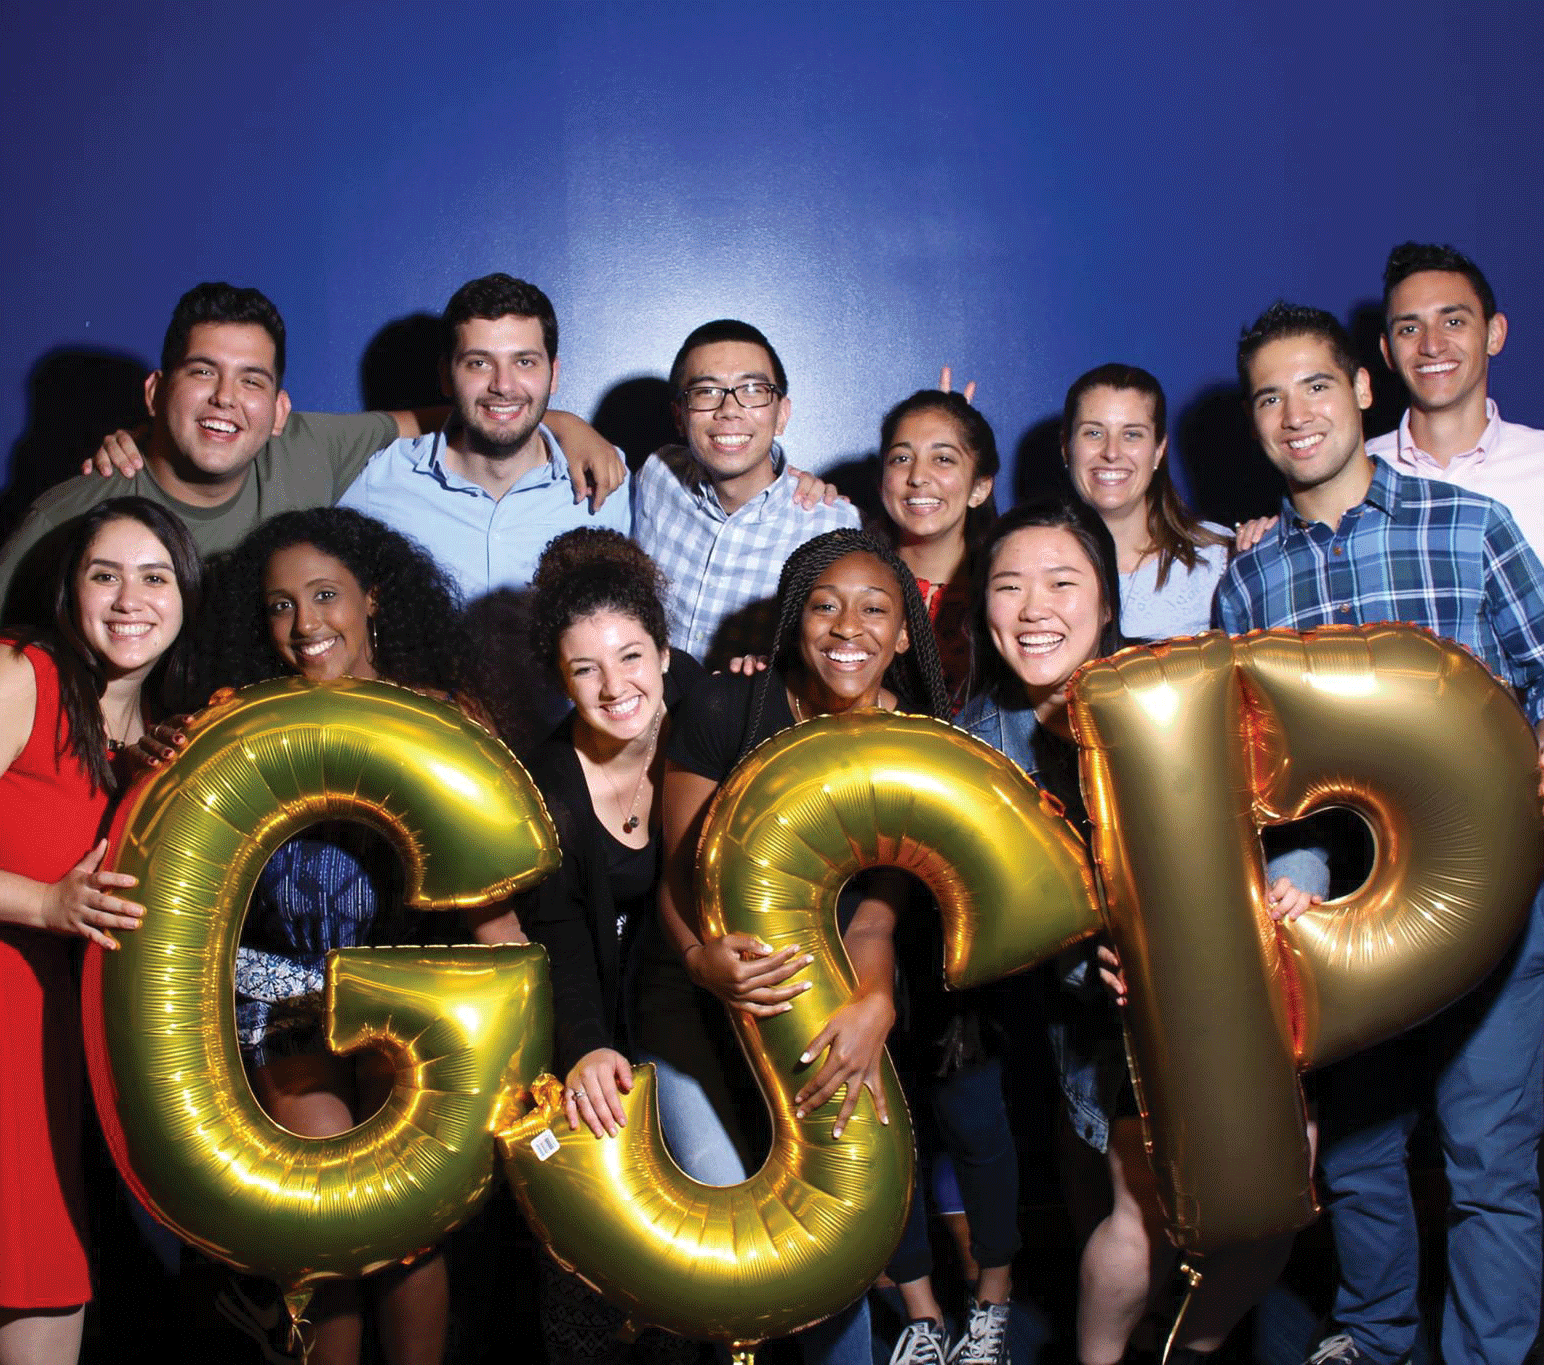 FACEBOOK The Georgetown Scholarship Program, which provides financial support for over 600 students, lauched their third annual #GSProud campaign to promote students from low-income and first-generation backgrounds.